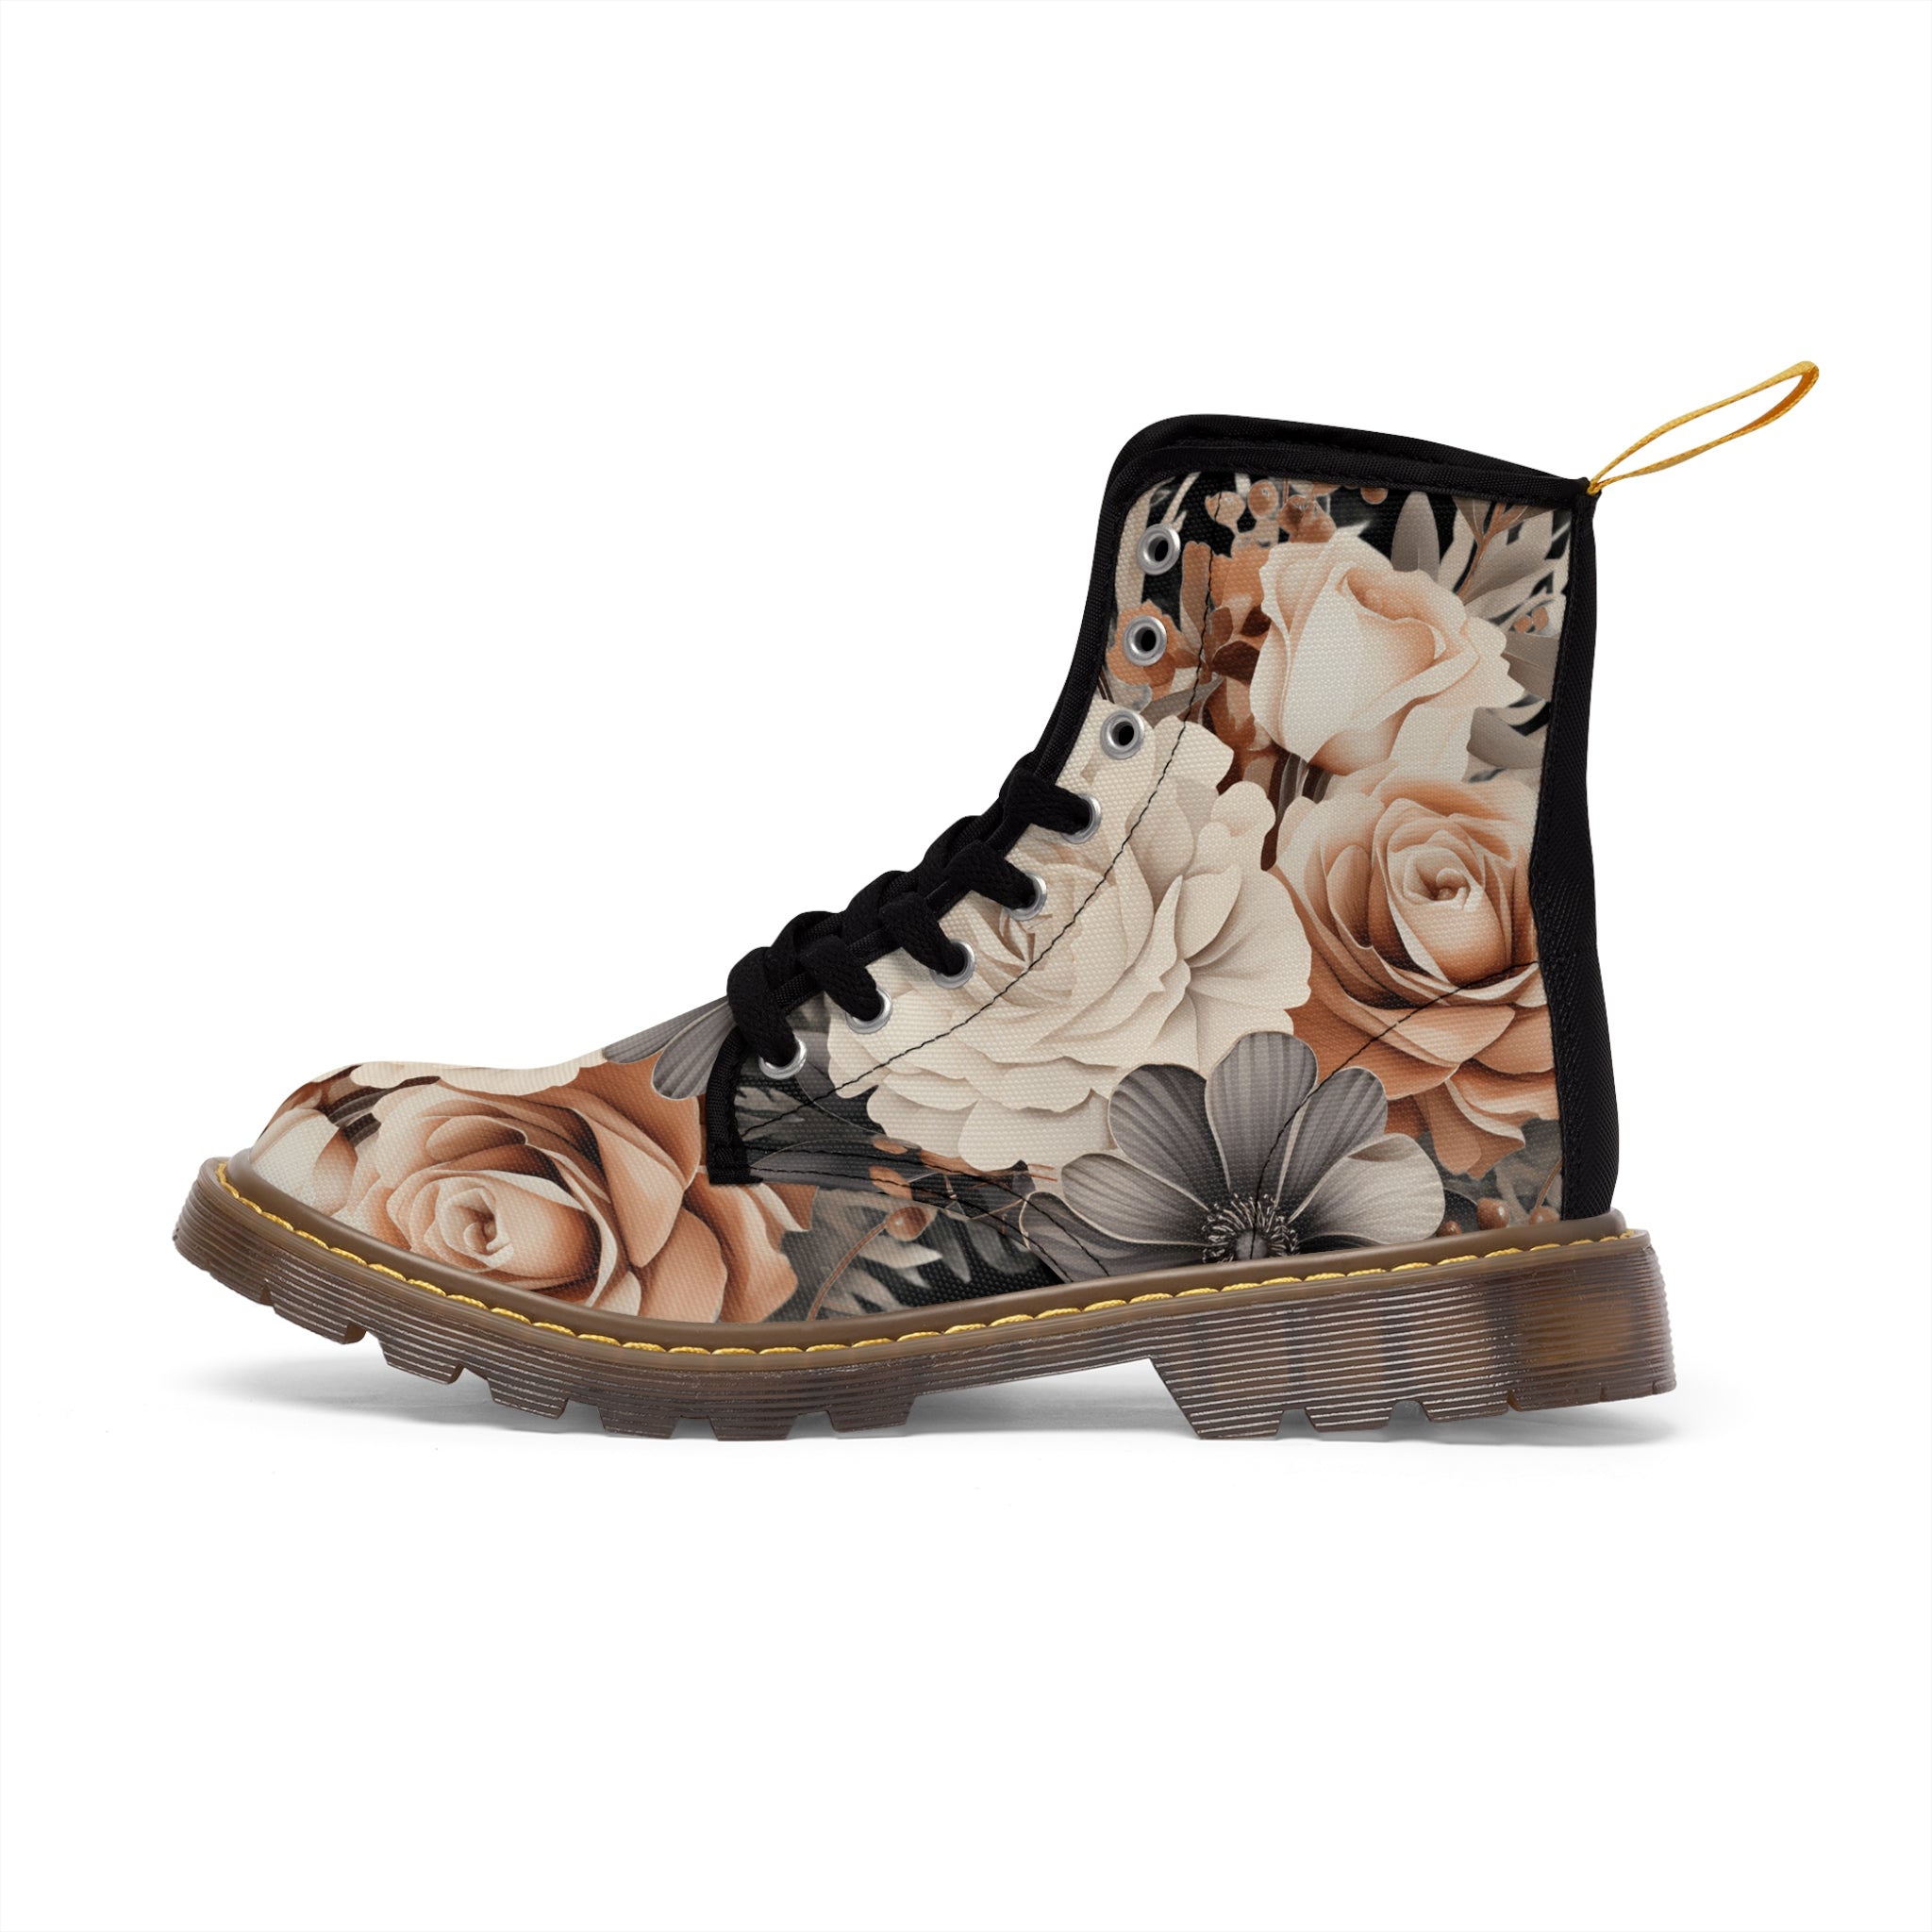 Vintage Gray, Peach and Cream Bloom Women's Canvas Boots, Military Style Lace Up Boots, Women's Flower Canvas Boots